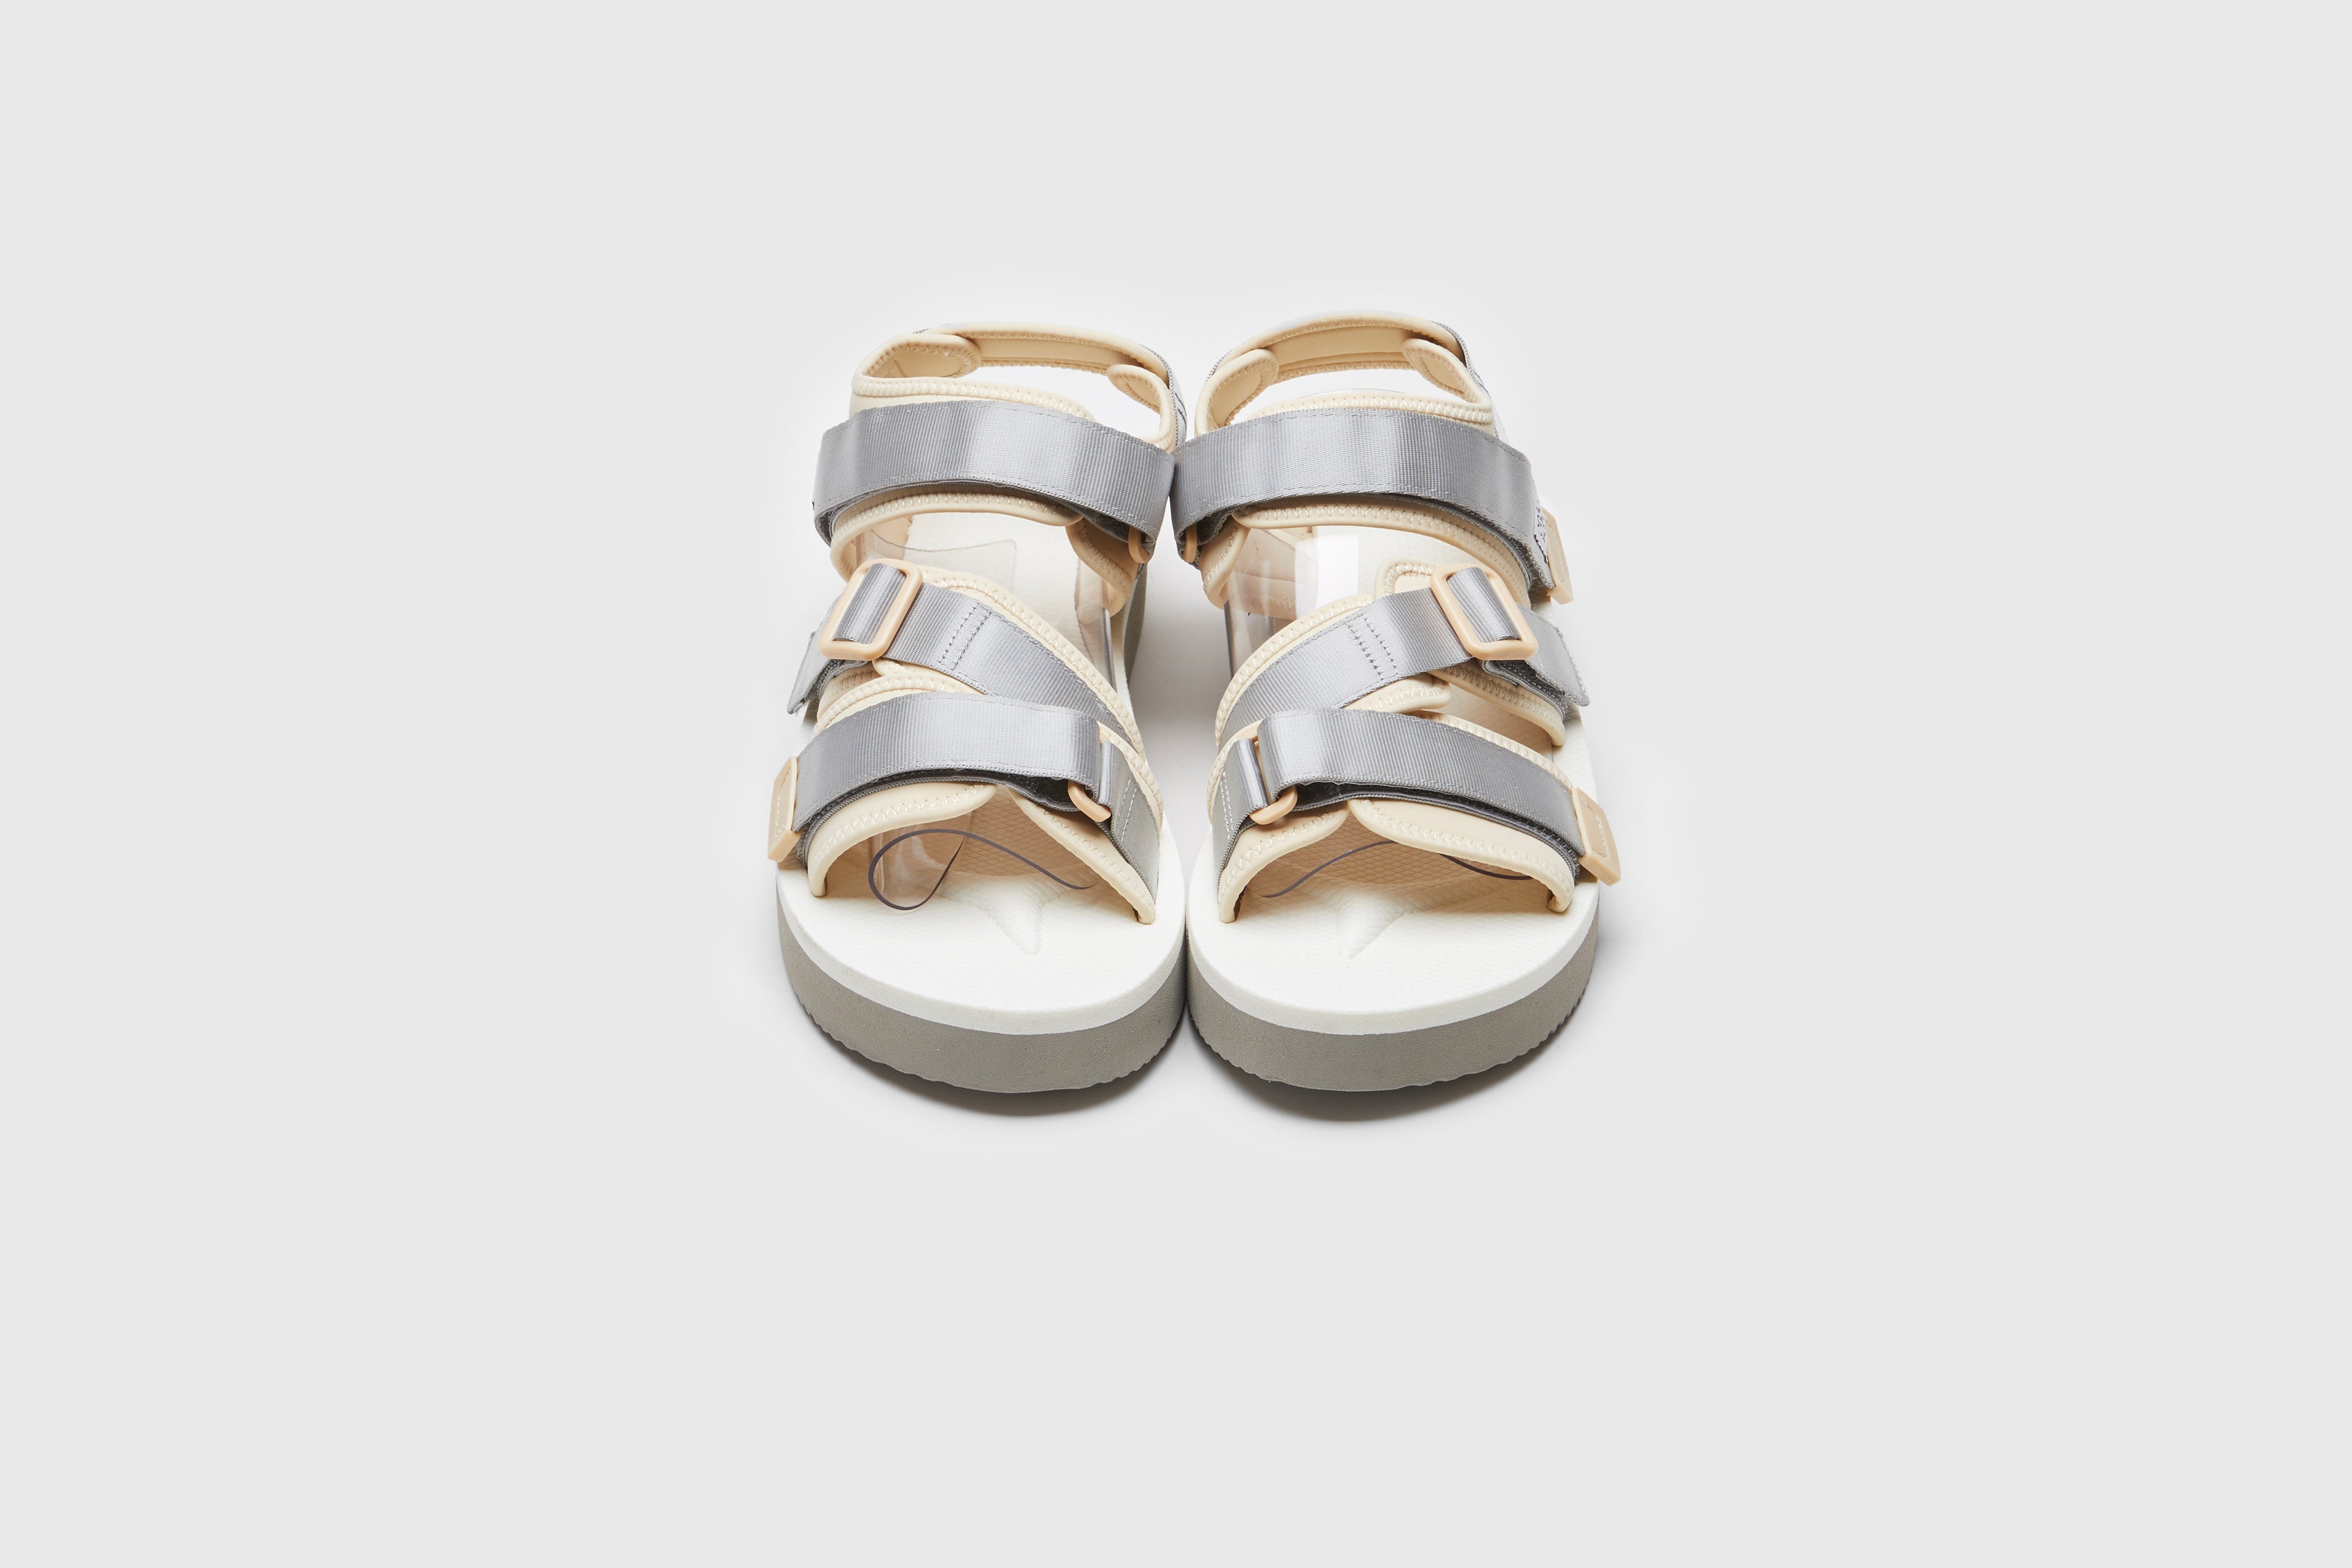 SUICOKE KISEE-PO sandals with gray & white nylon upper, gray & white midsole and sole, strap and logo patch. From Spring/Summer 2023 collection on eightywingold Web Store, an official partner of SUICOKE. OG-044PO GRAY X WHITE